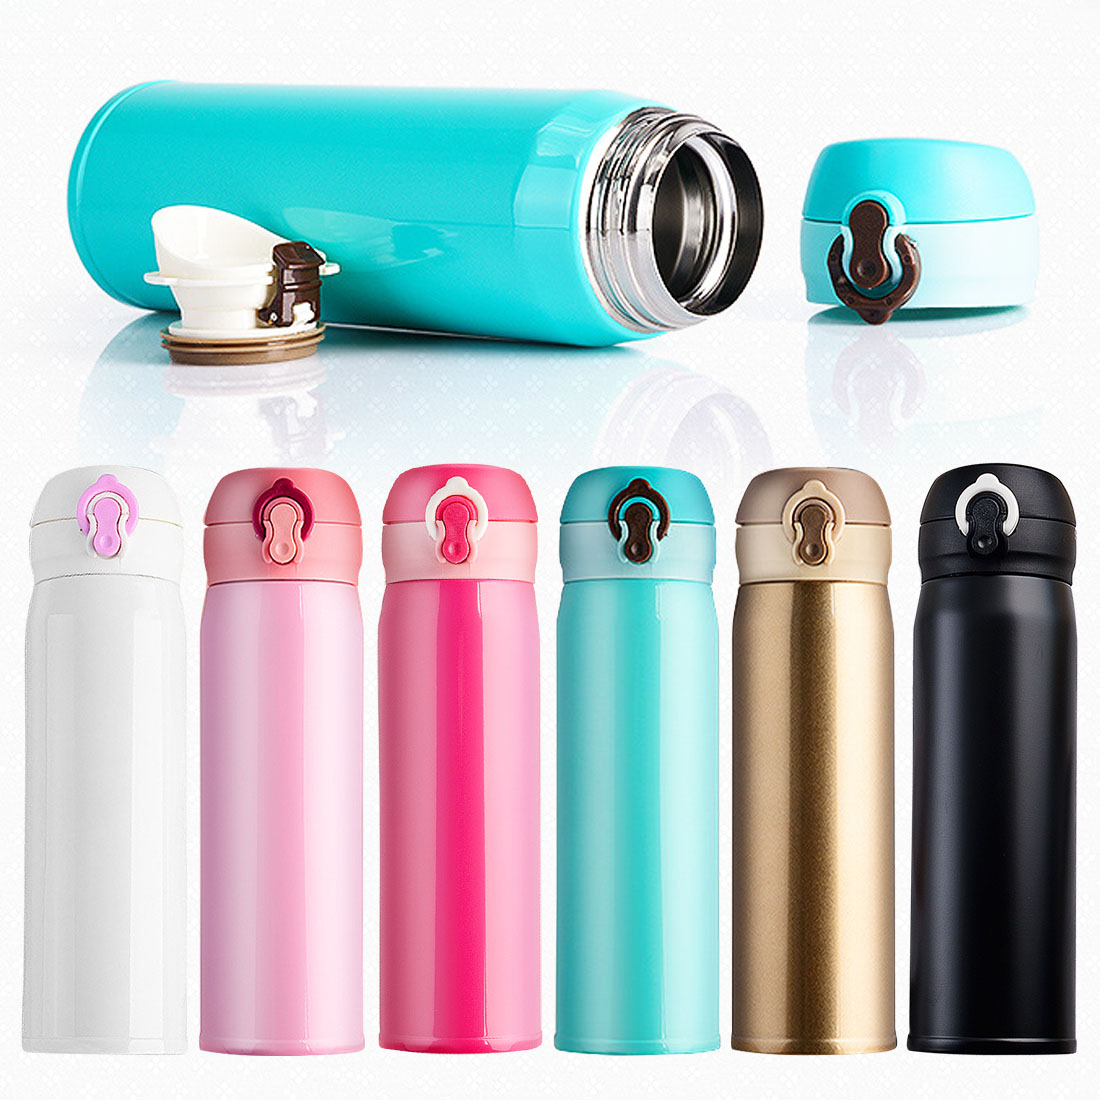 Portable 500ml Thermoses Bottle For Tea Vacuum Flask Thermoses Stainless Steel Straight Cup Thermoses Mug Women Mini Thermocup